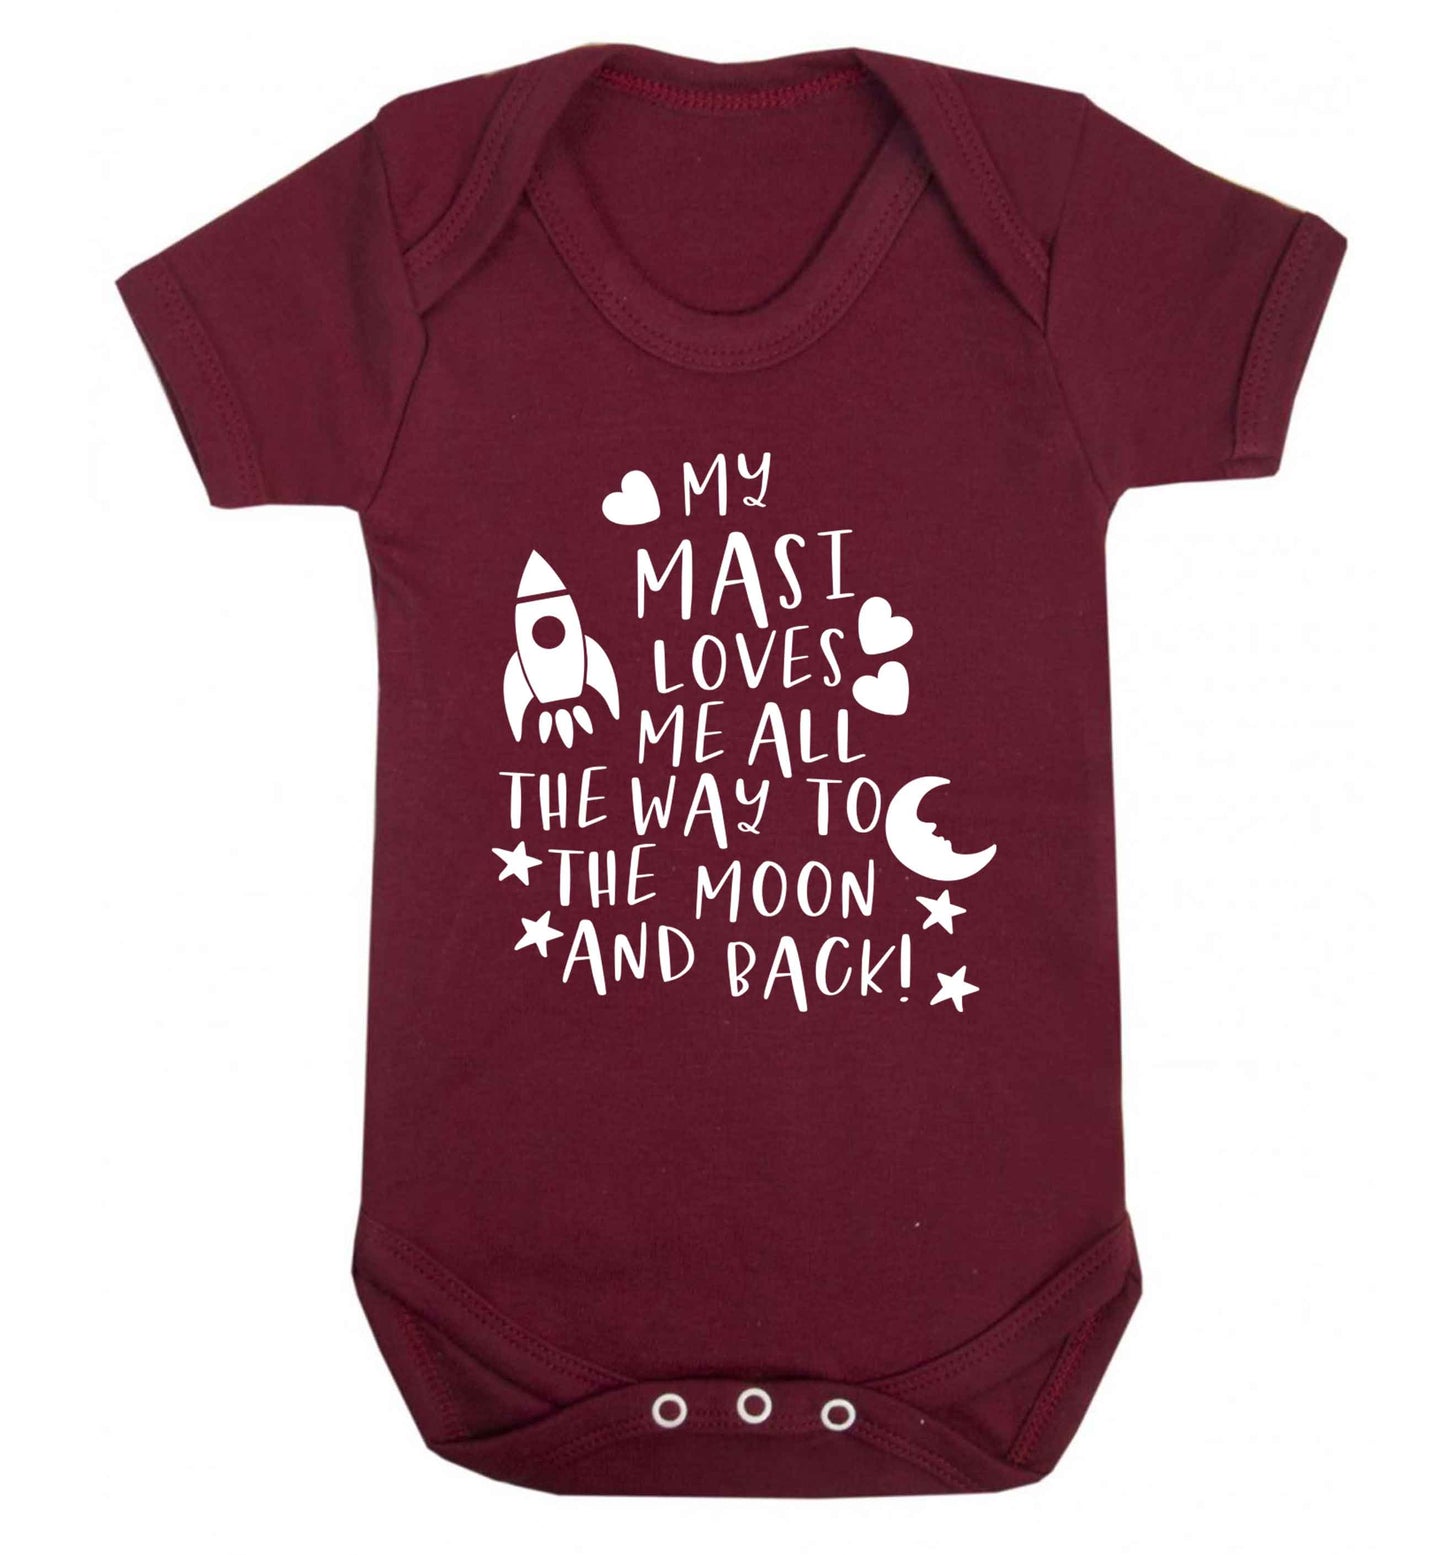 My masi loves me all the way to the moon and back Baby Vest maroon 18-24 months